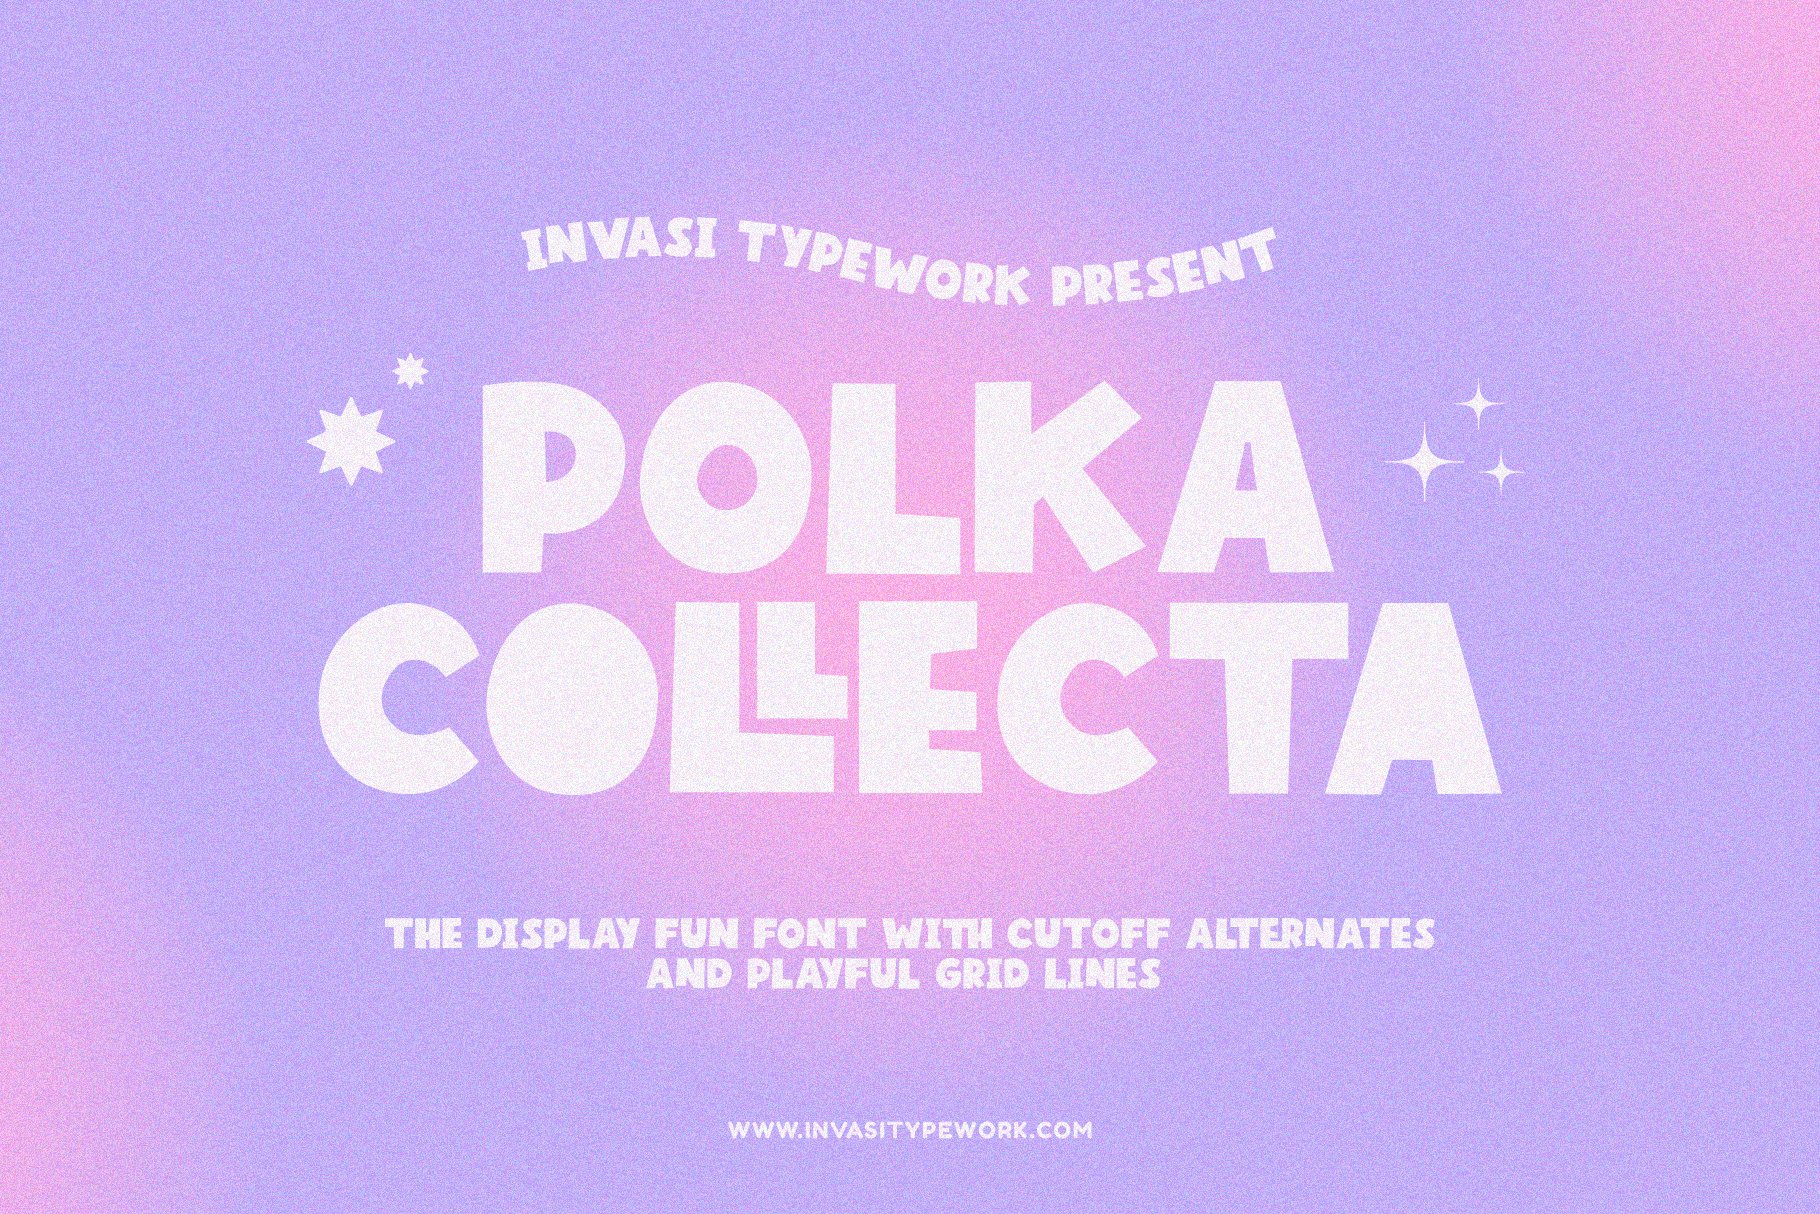 Polka Collecta - Bold Playful cover image.